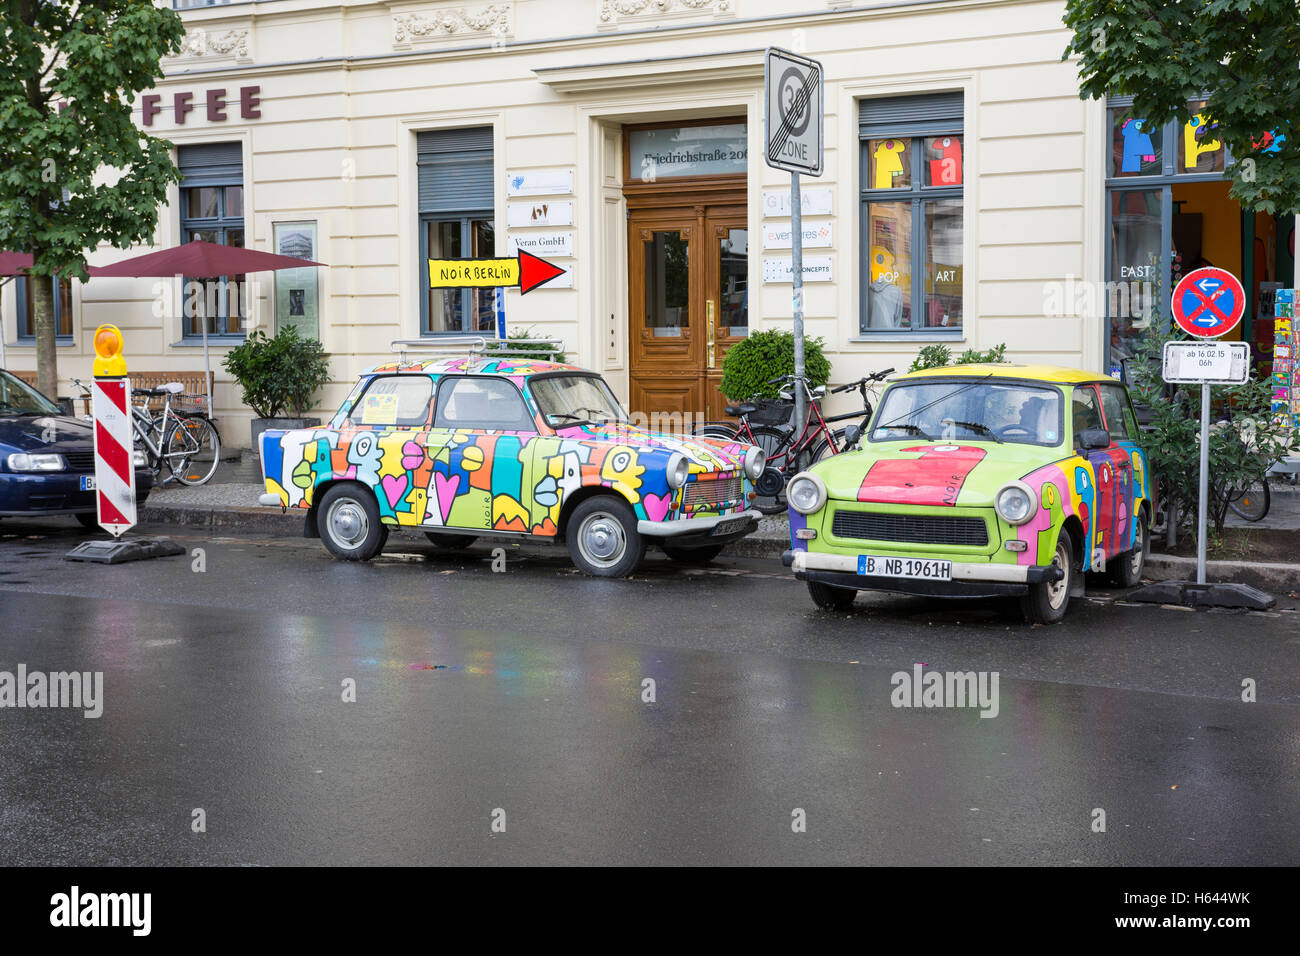 The old Trabant car in Berlin Stock Photo